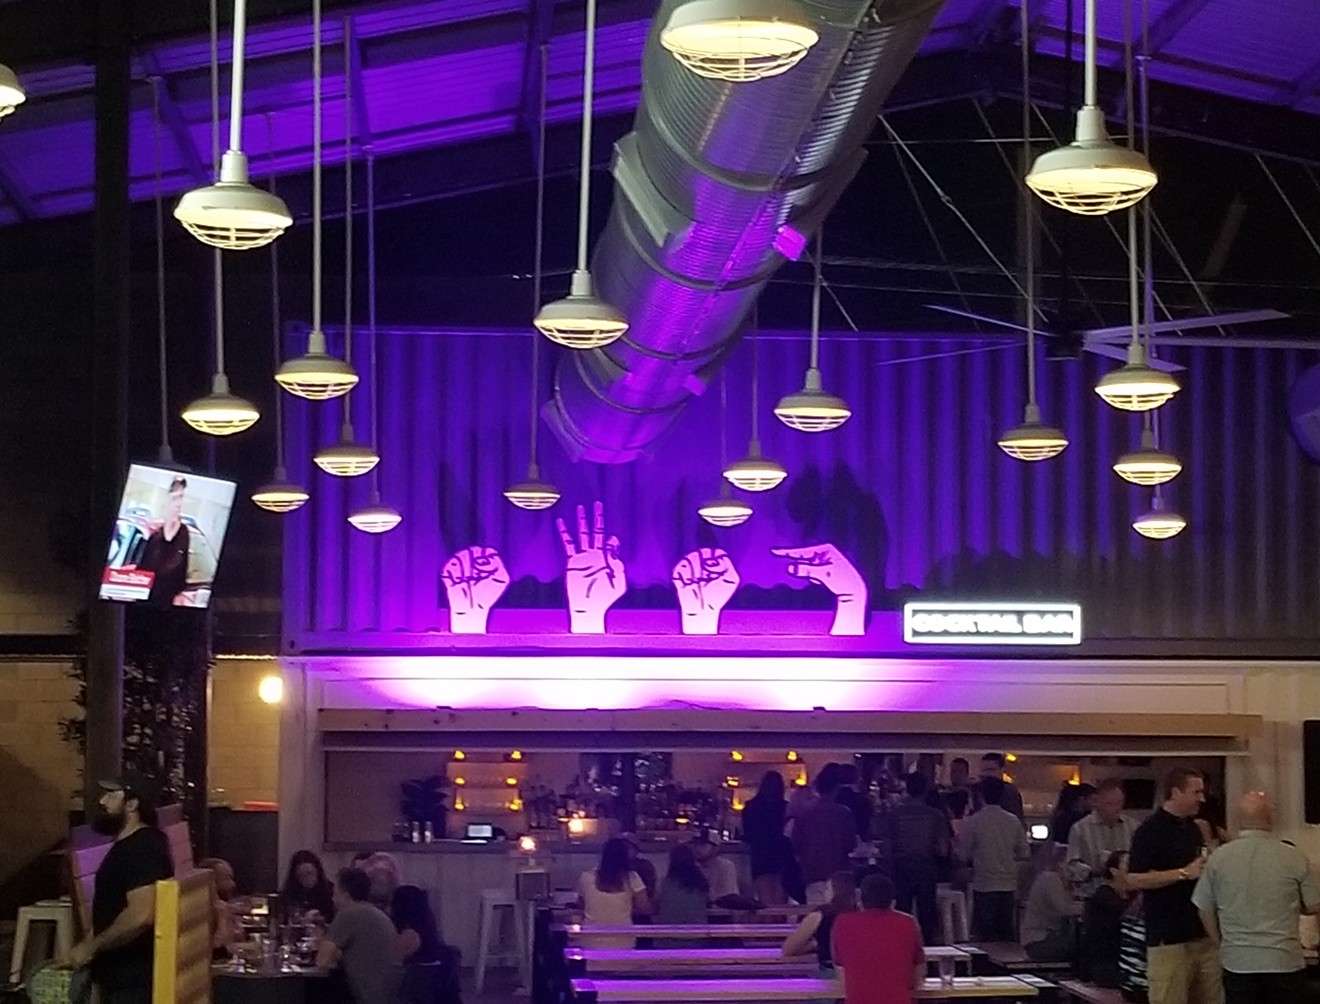 Heed the call of the purple light at So Far, So Good inside The Churchill.